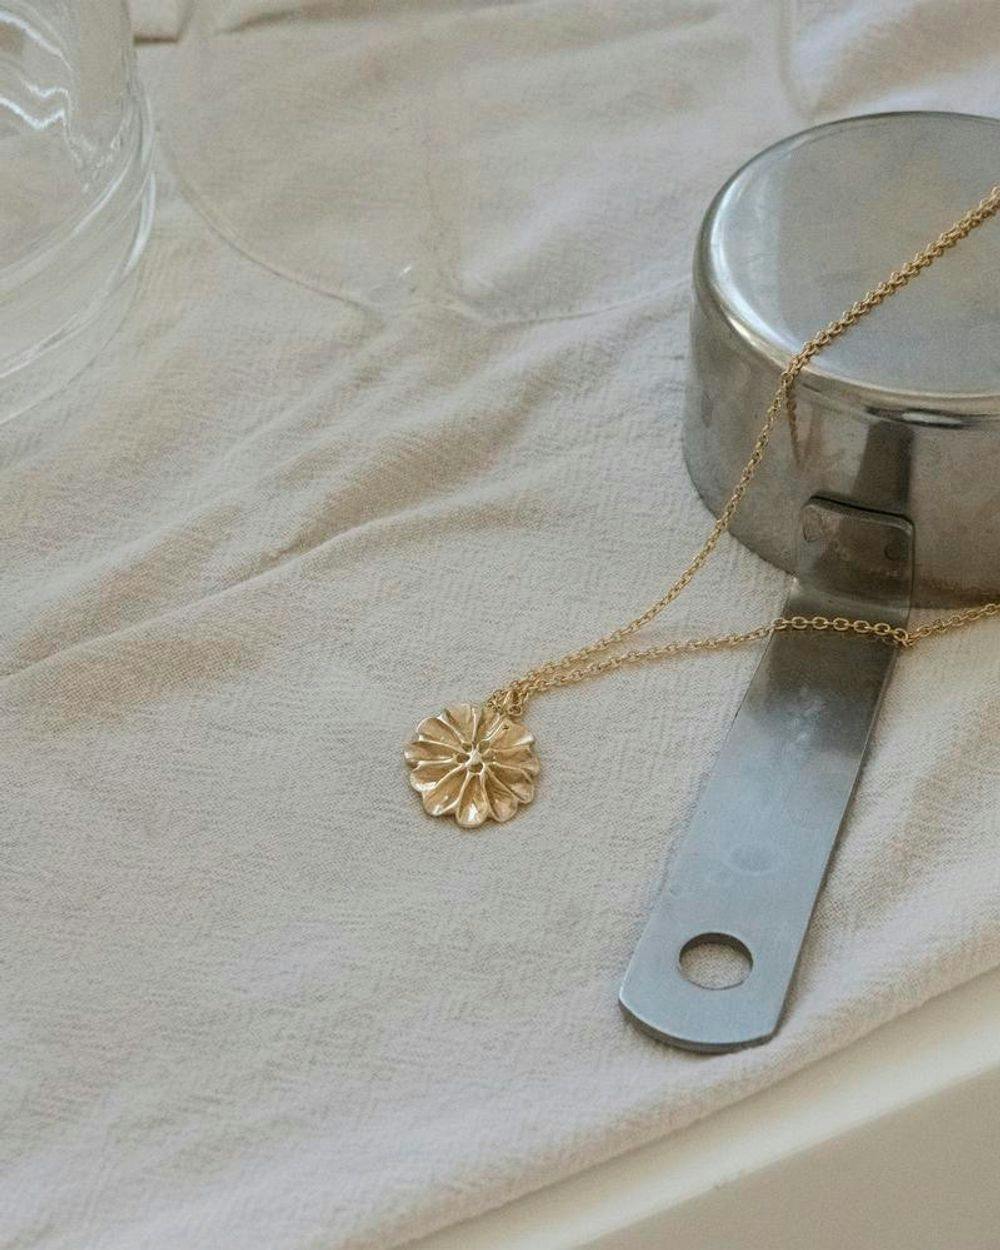 Main product image for Flower Necklace Gold